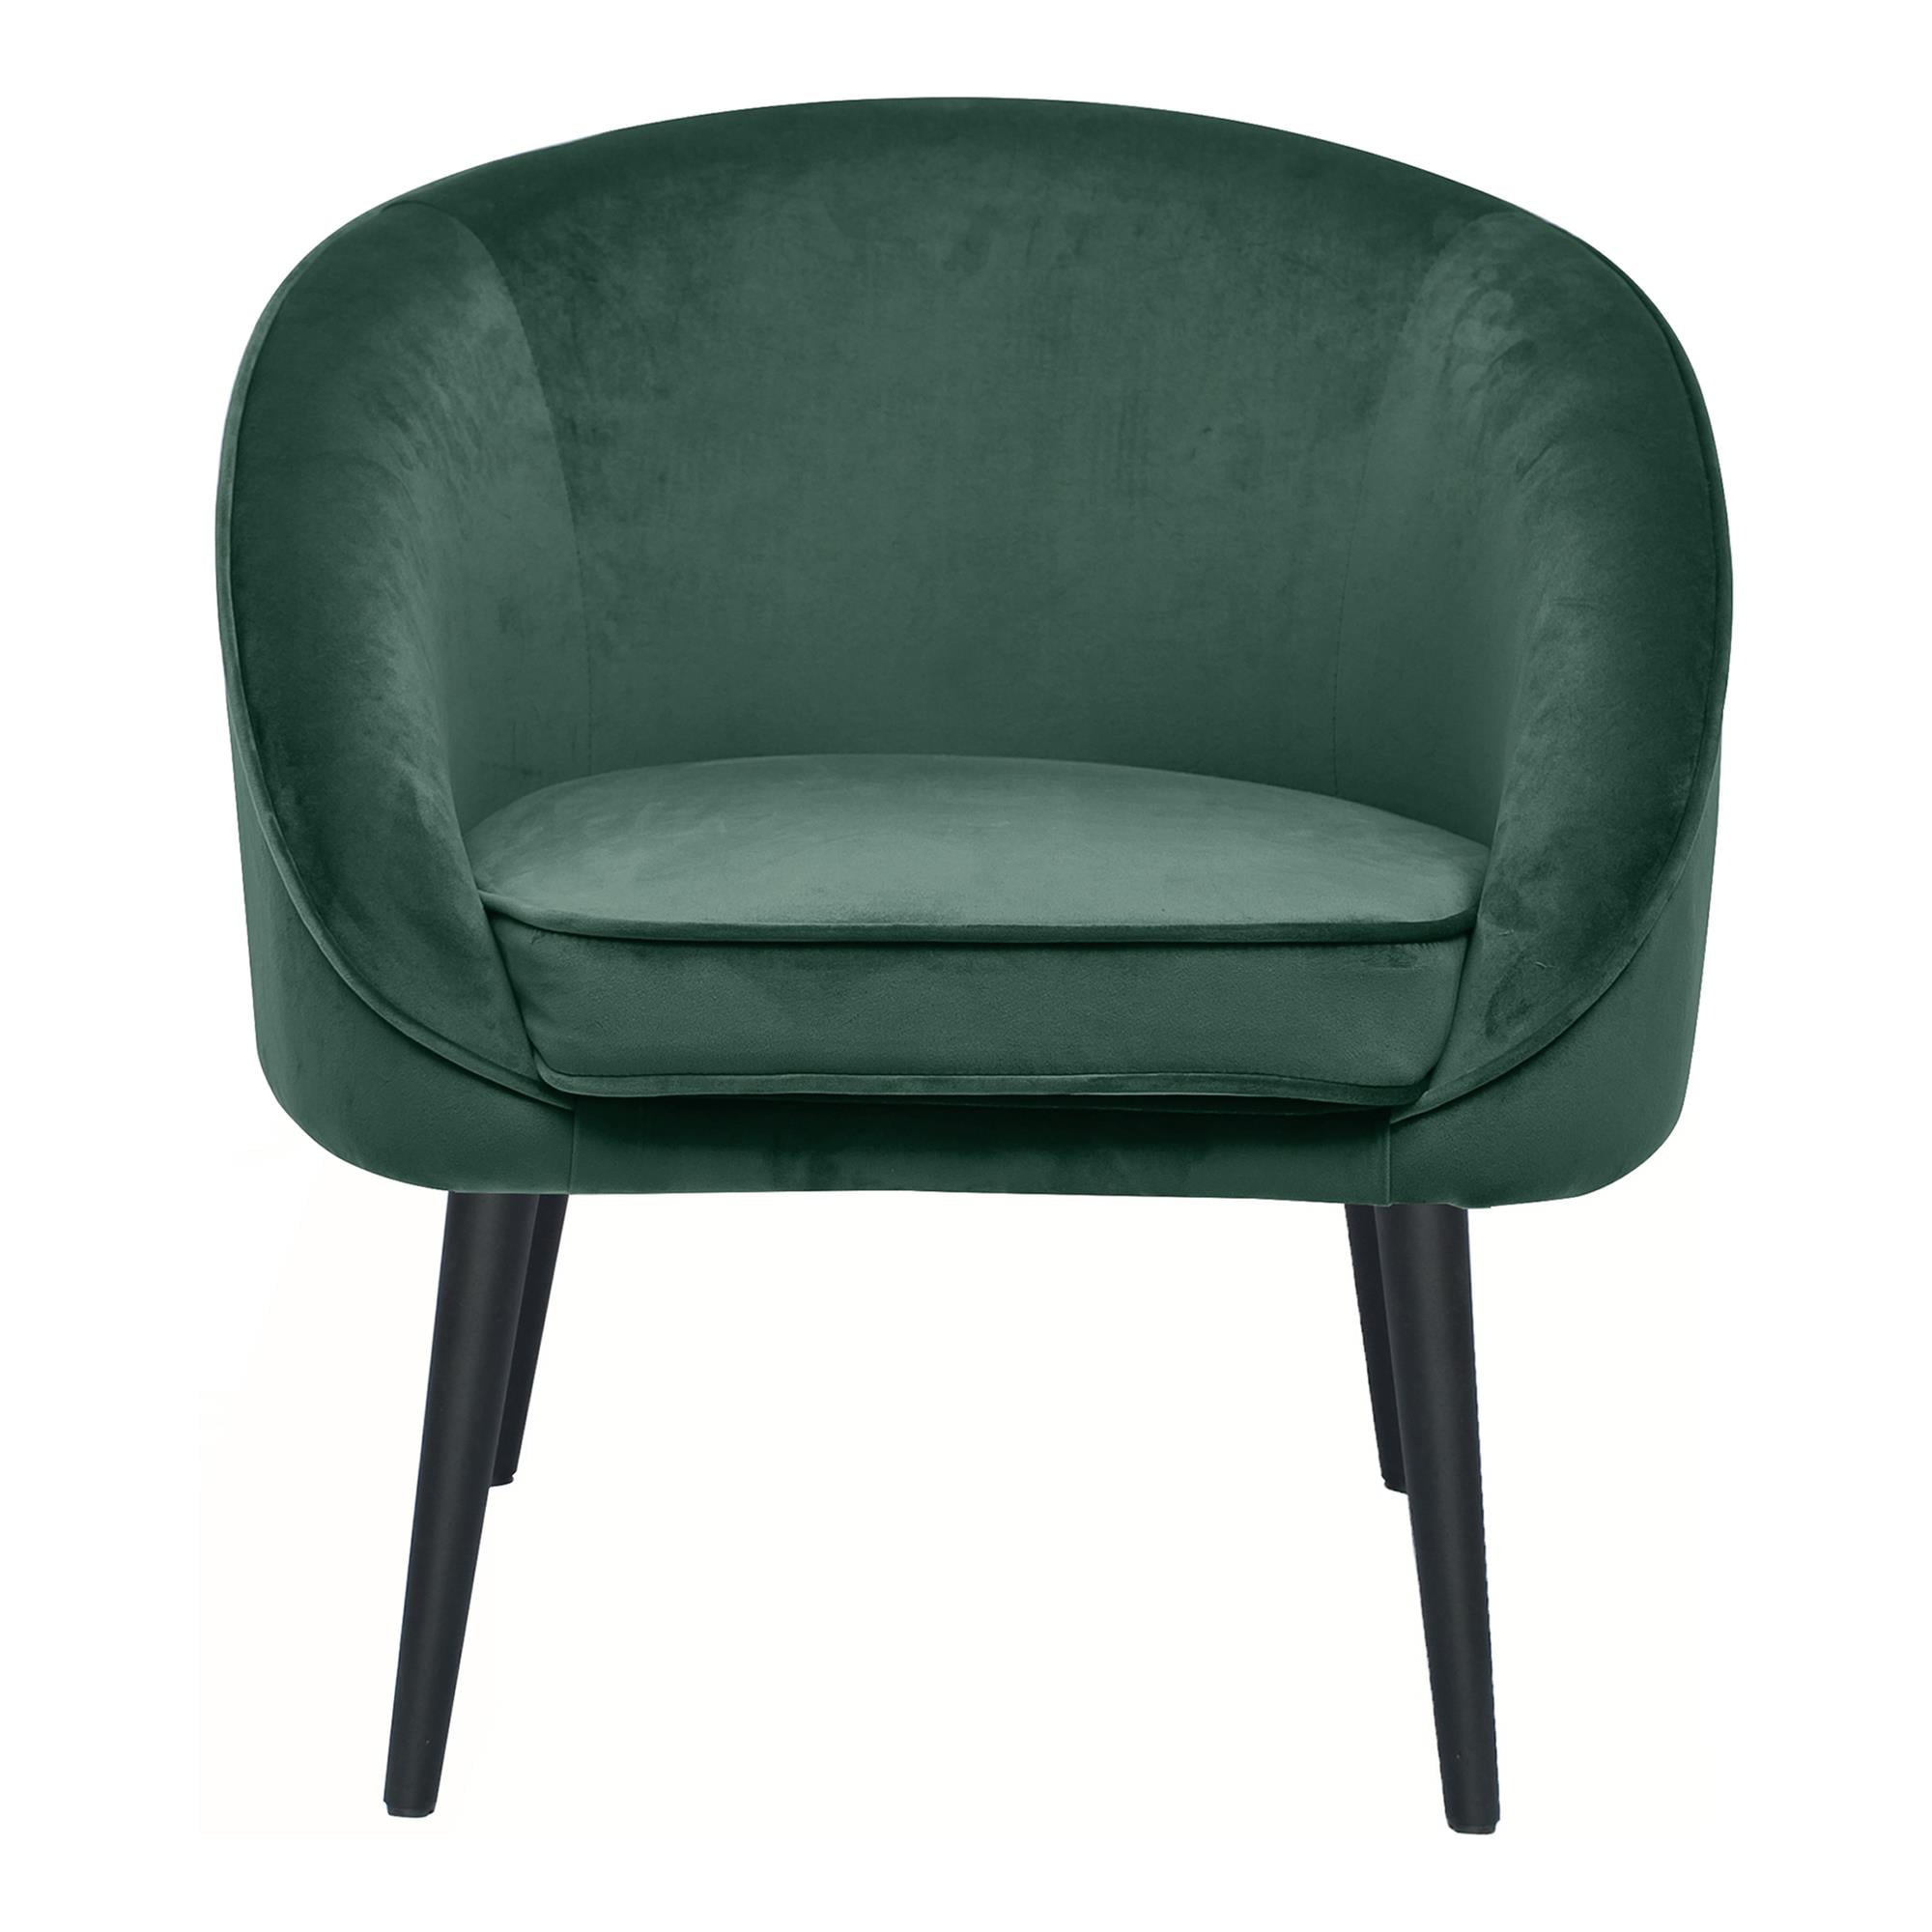 Moe's Home Collection Farah Chair Green